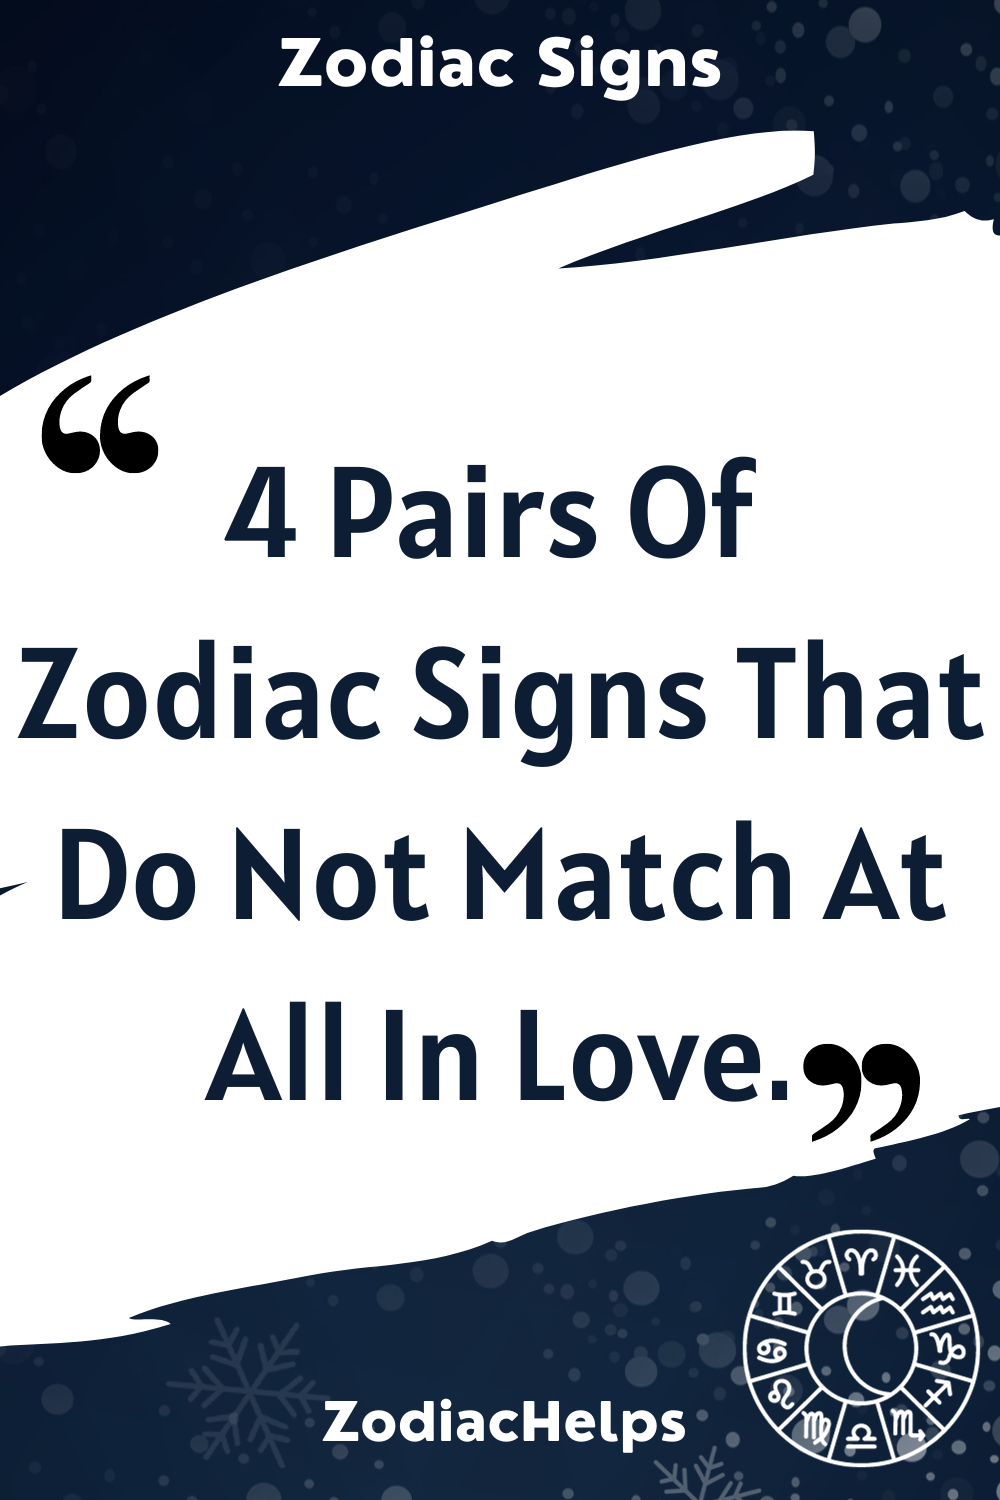 4 Pairs Of Zodiac Signs That Do Not Match At All In Love.